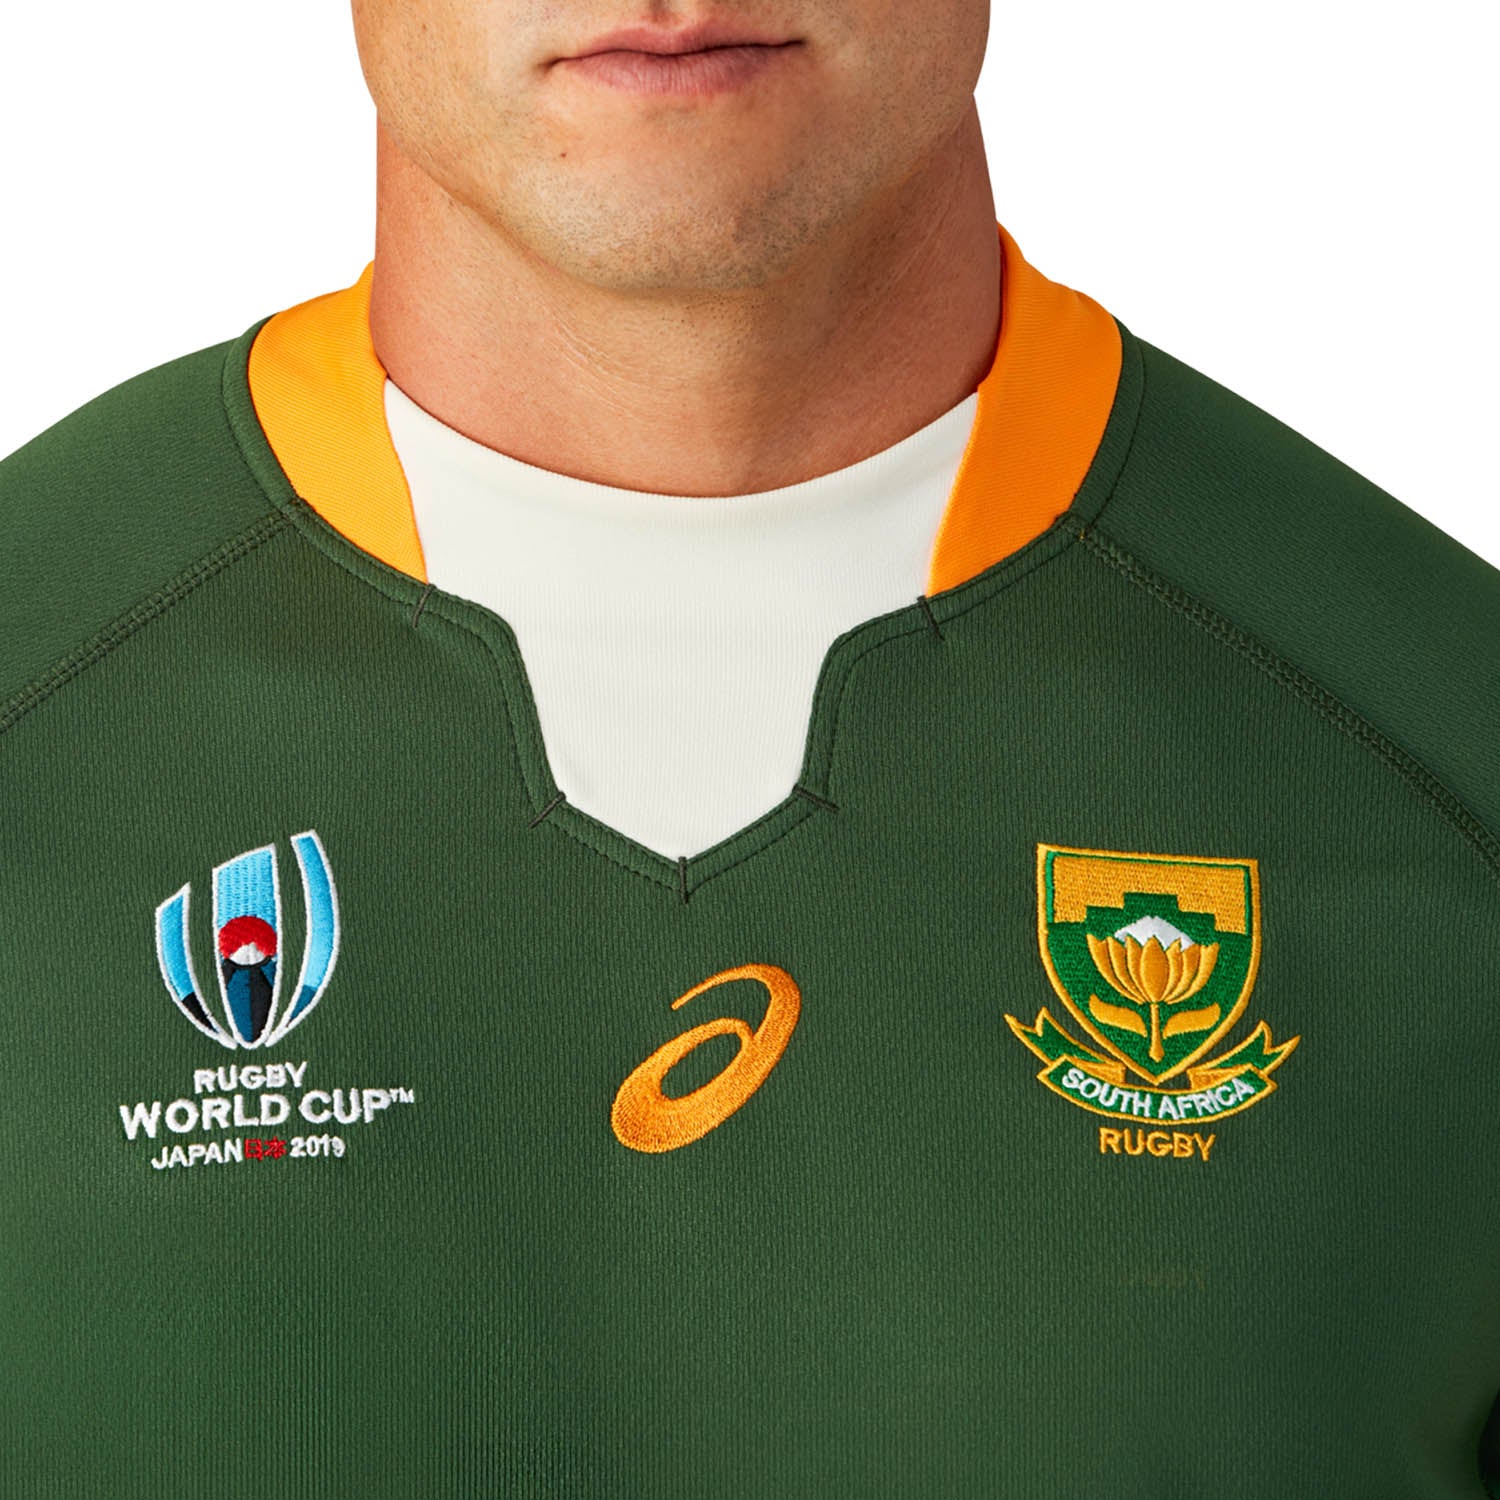 south africa rugby uniform